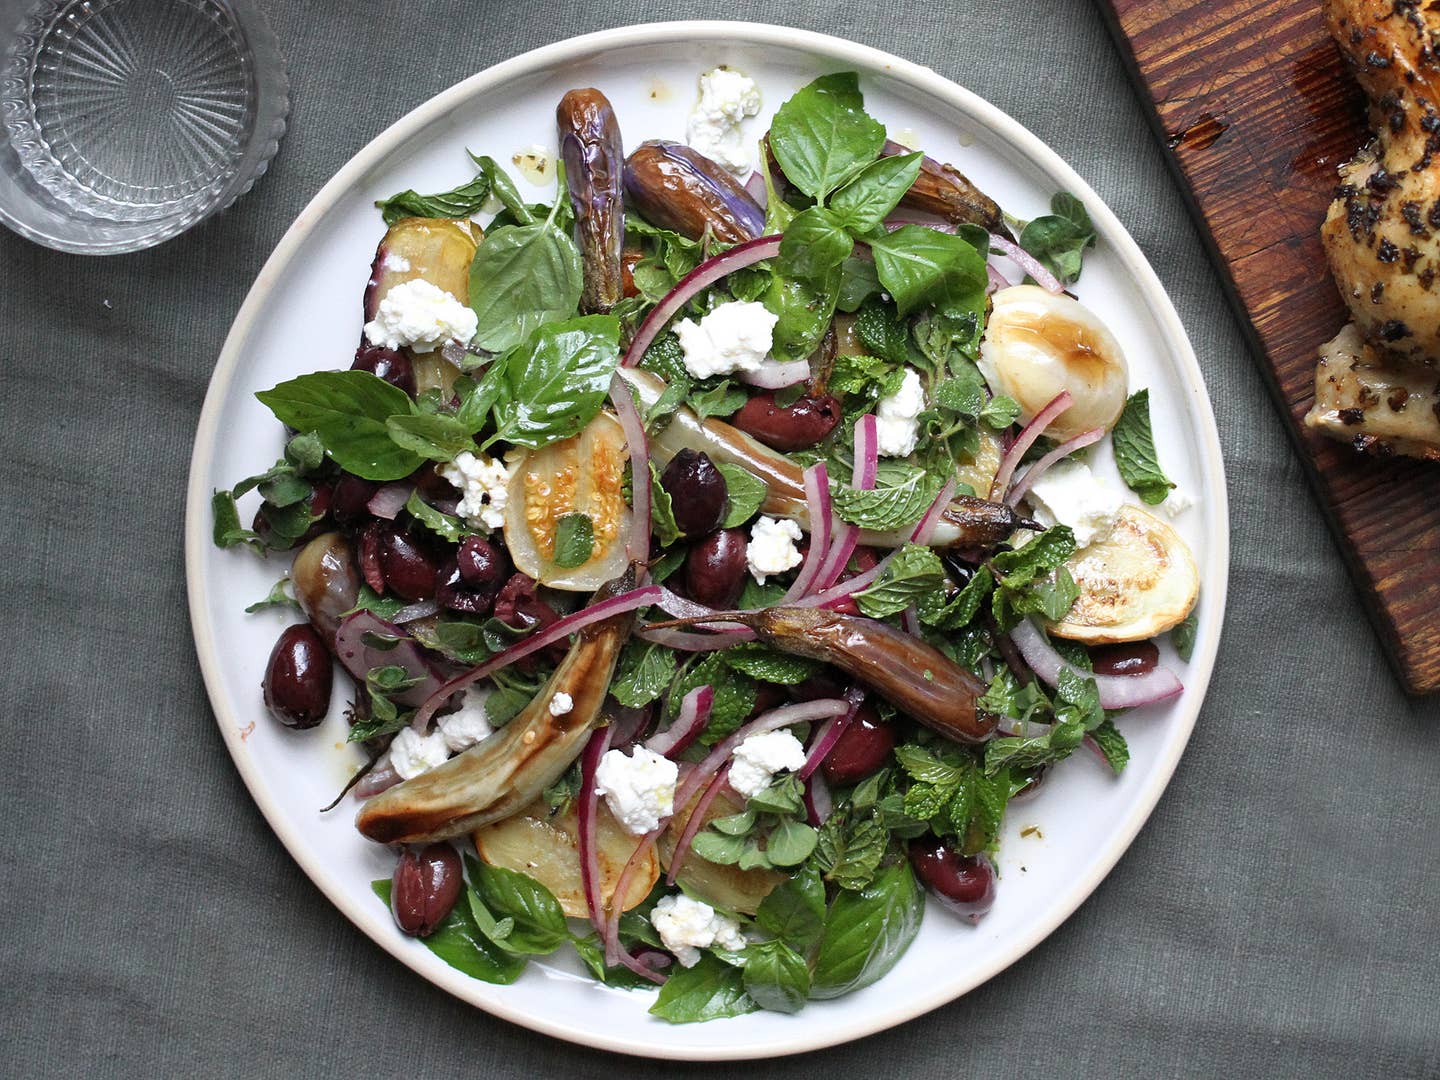 Turn Your Eggplants Into Salad for a Quick but Filling Meal